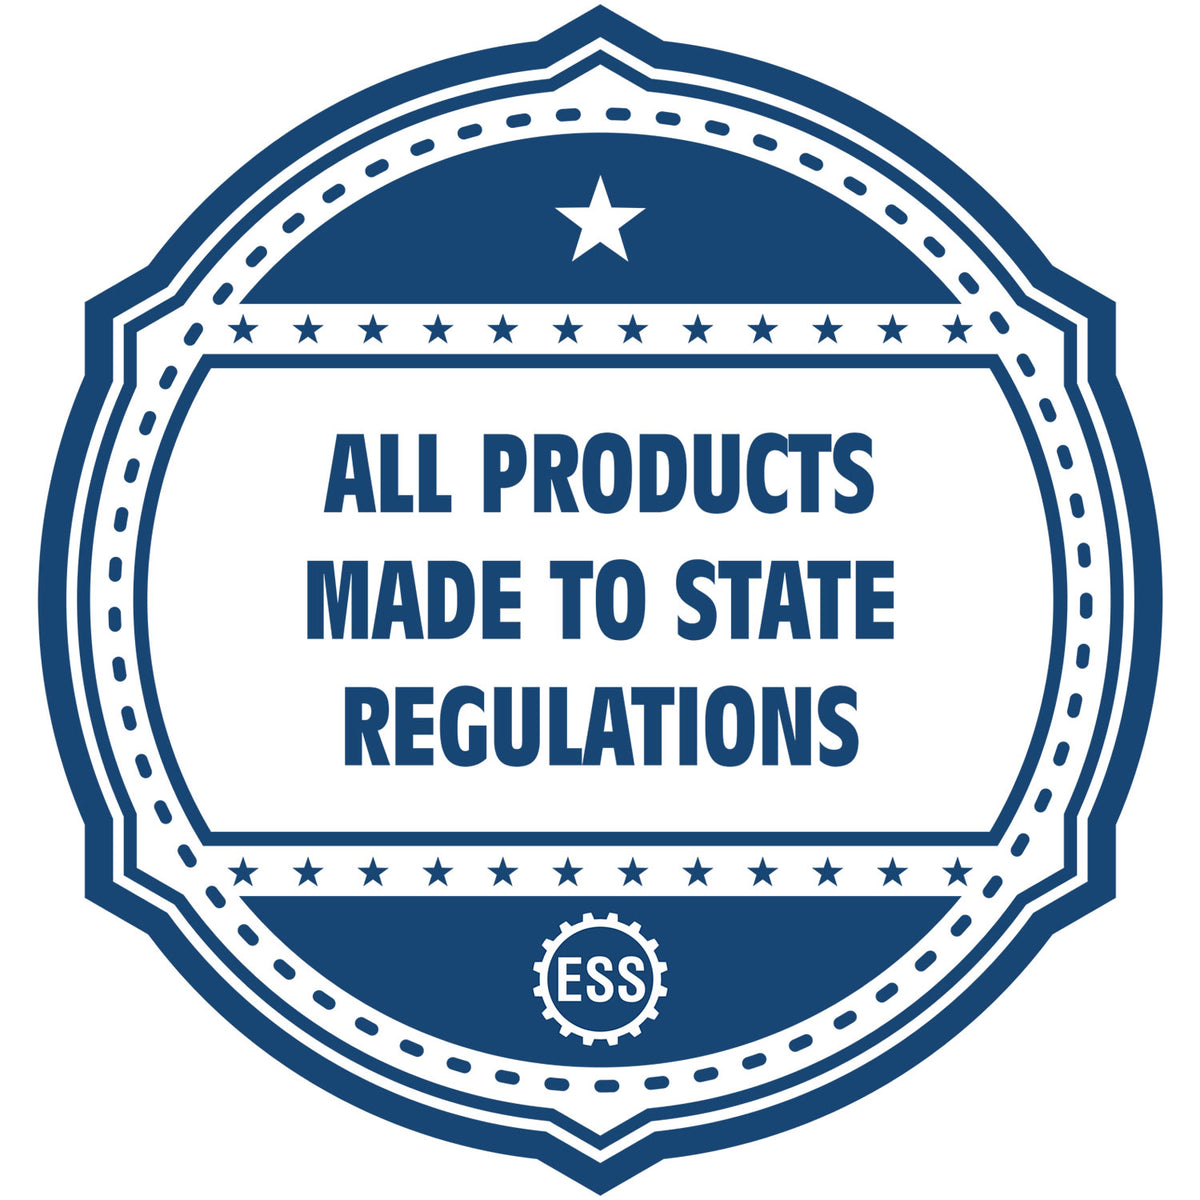 An icon or badge element for the Heavy-Duty Maine Rectangular Notary Stamp showing that this product is made in compliance with state regulations.